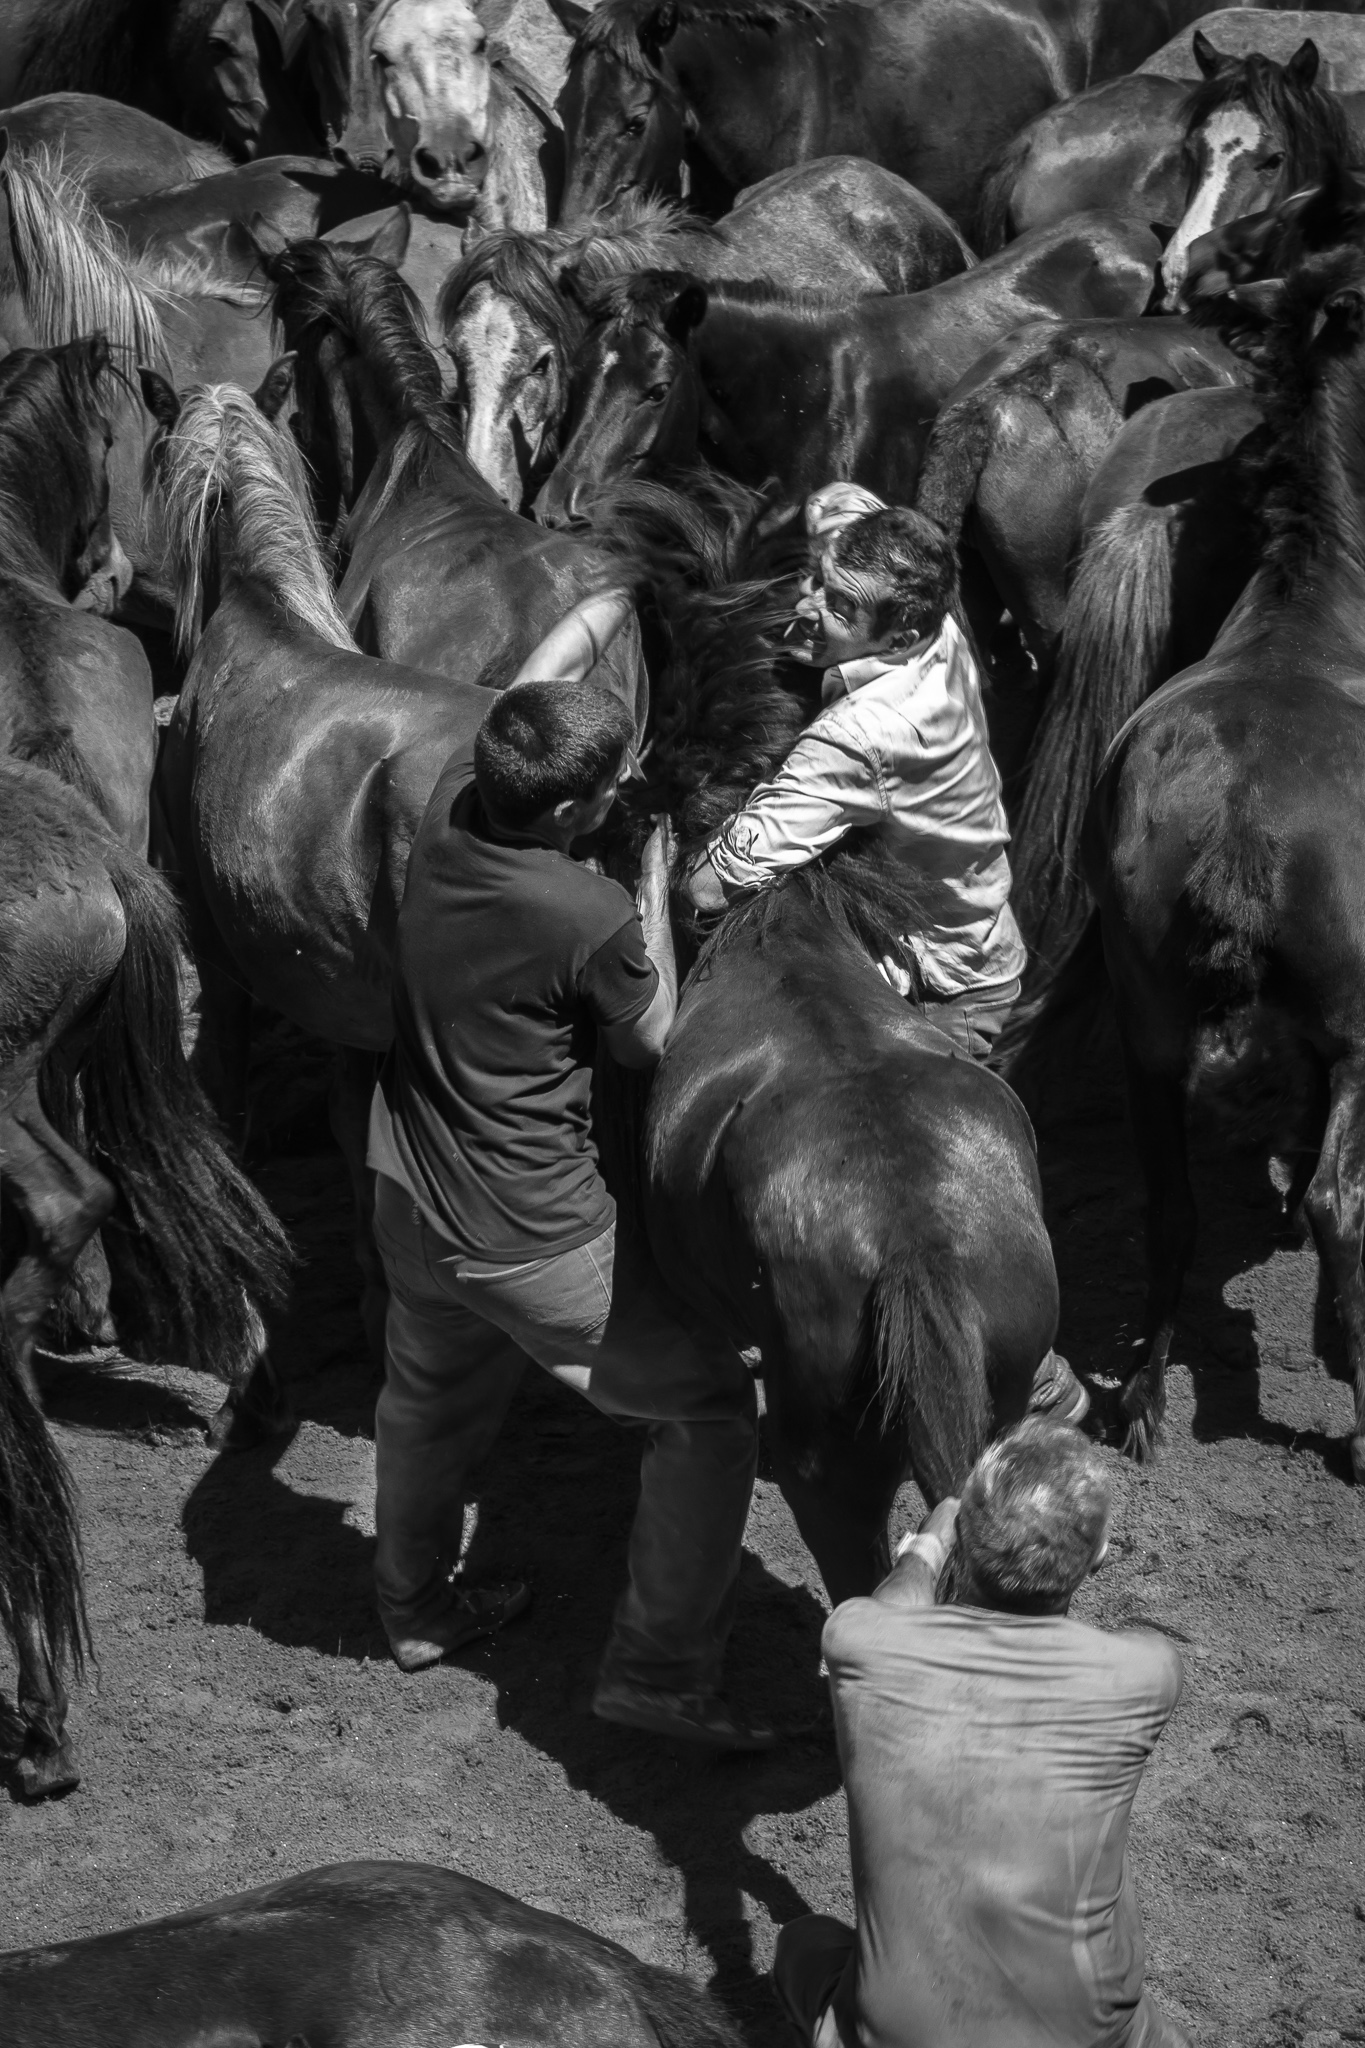 The Rapa das Bestas de Sabucedo, a town belonging to the municipality of La Estrada, Pontevedra, is celebrated every year during the first Friday, Saturday, Sunday and Monday of July. <br> The celebration consists of descending the herds of wild horses from the Galician mountains and later to put them in the 'curro', to cut off their mane and tail, to get rid of parasites and to mark them. <br> The descent takes place thanks to the neighbors of Sabucedo and all the incountable collaborators. However, when the animals are in the curro only the aloitadores face the herds of wild horses and stallions with their bravery and dexterity.